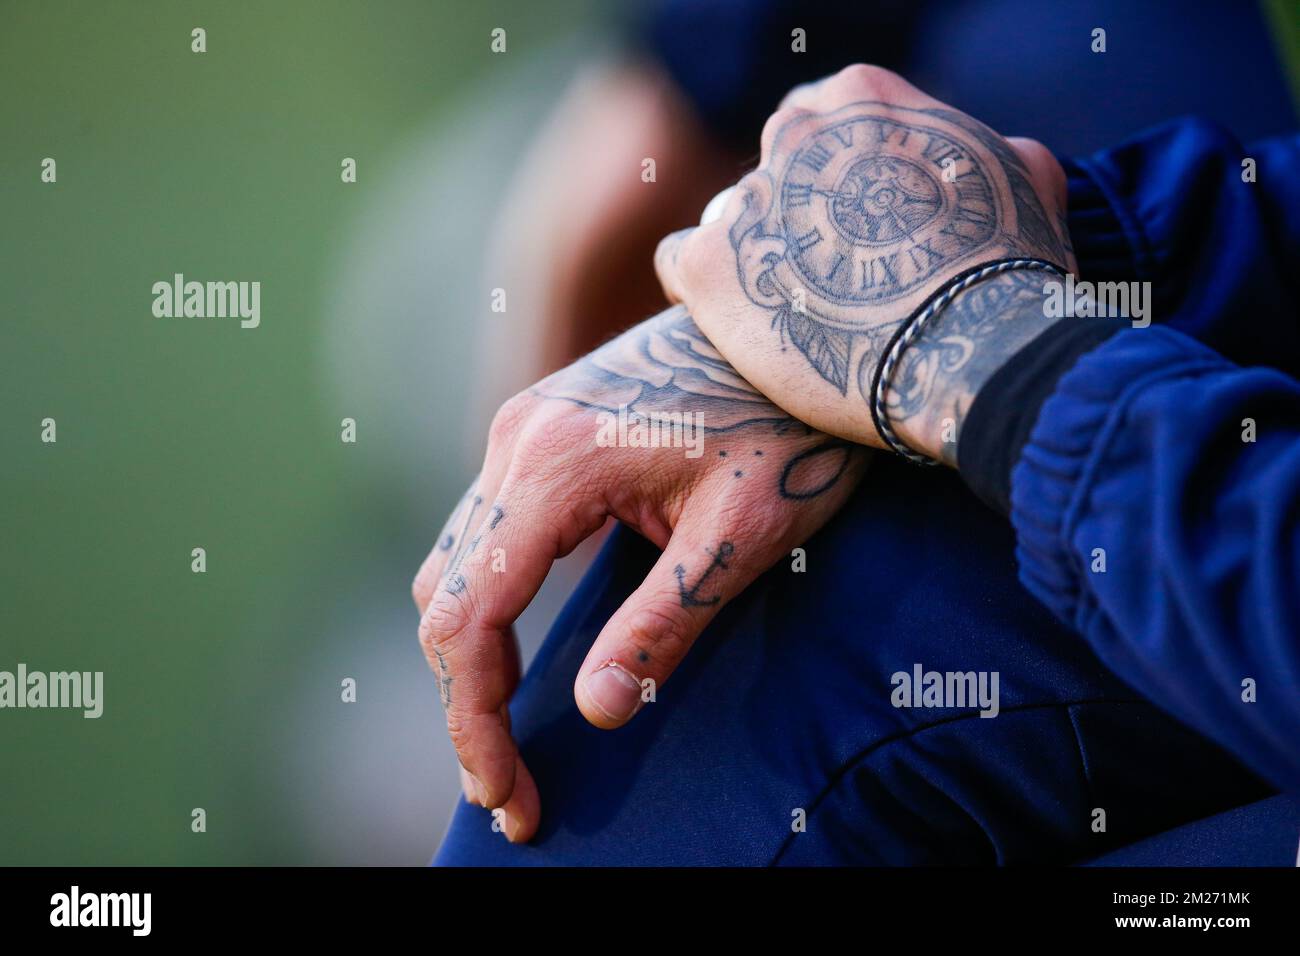 Union's goalkeeper Anthony Sadin's hands pictured during the Jupiler Pro League match between Union Saint-Gilloise and Sint Truiden VV, in Brussels, Saturday 13 May 2017, on day 8 of the Play-off 2A of the Belgian soccer championship. BELGA PHOTO BRUNO FAHY Stock Photo